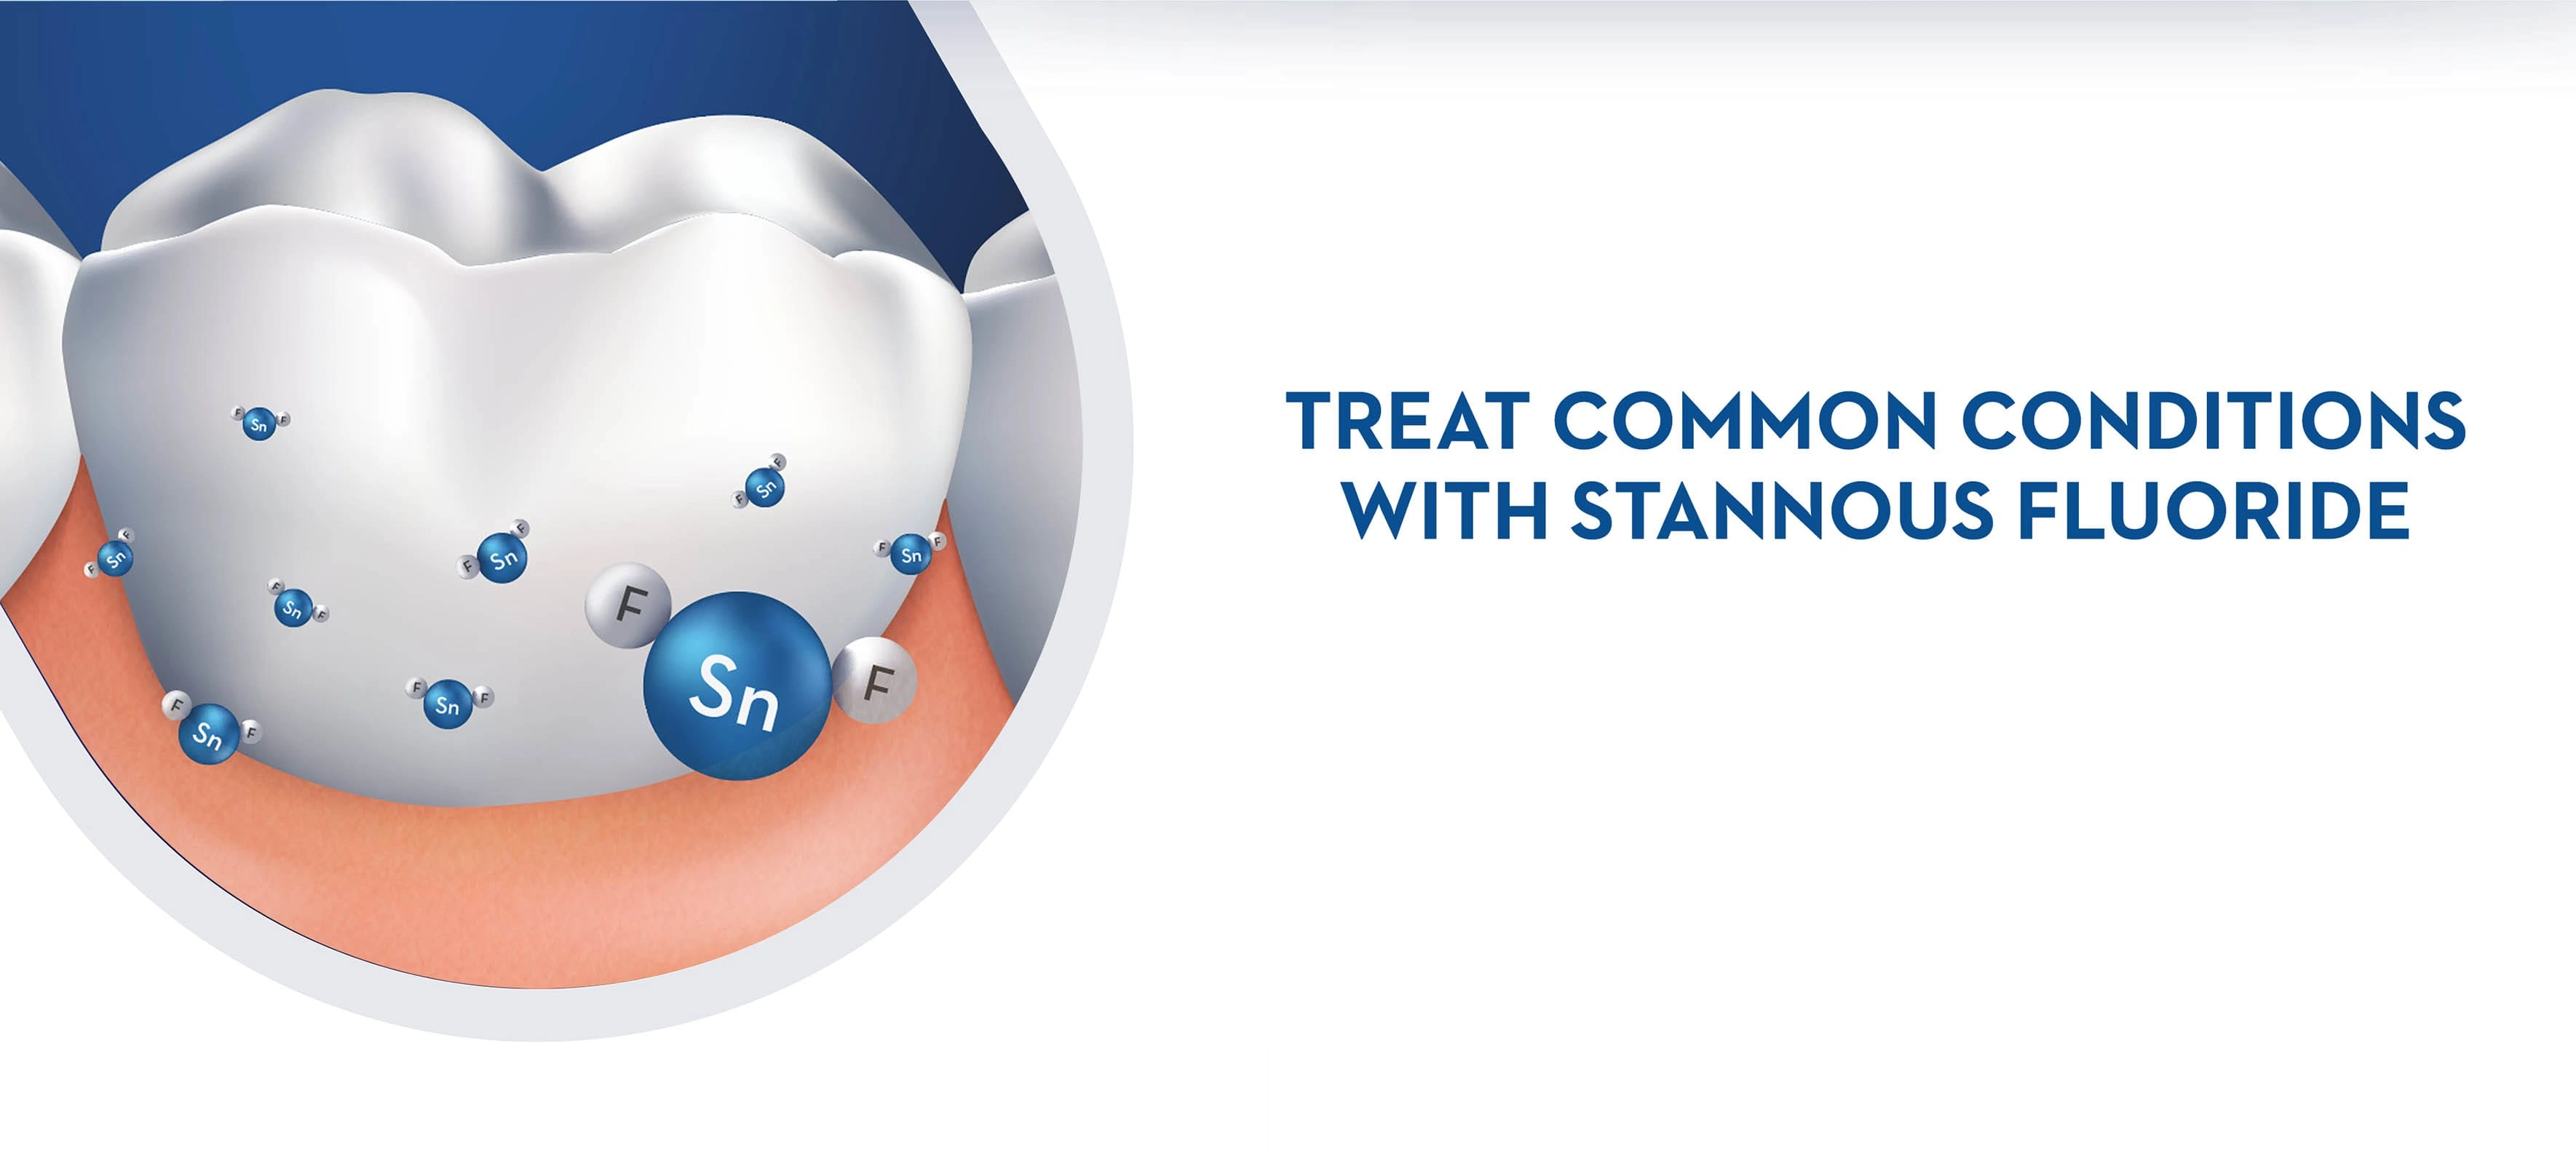 Treat Common Conditions with Stannous Fluoride